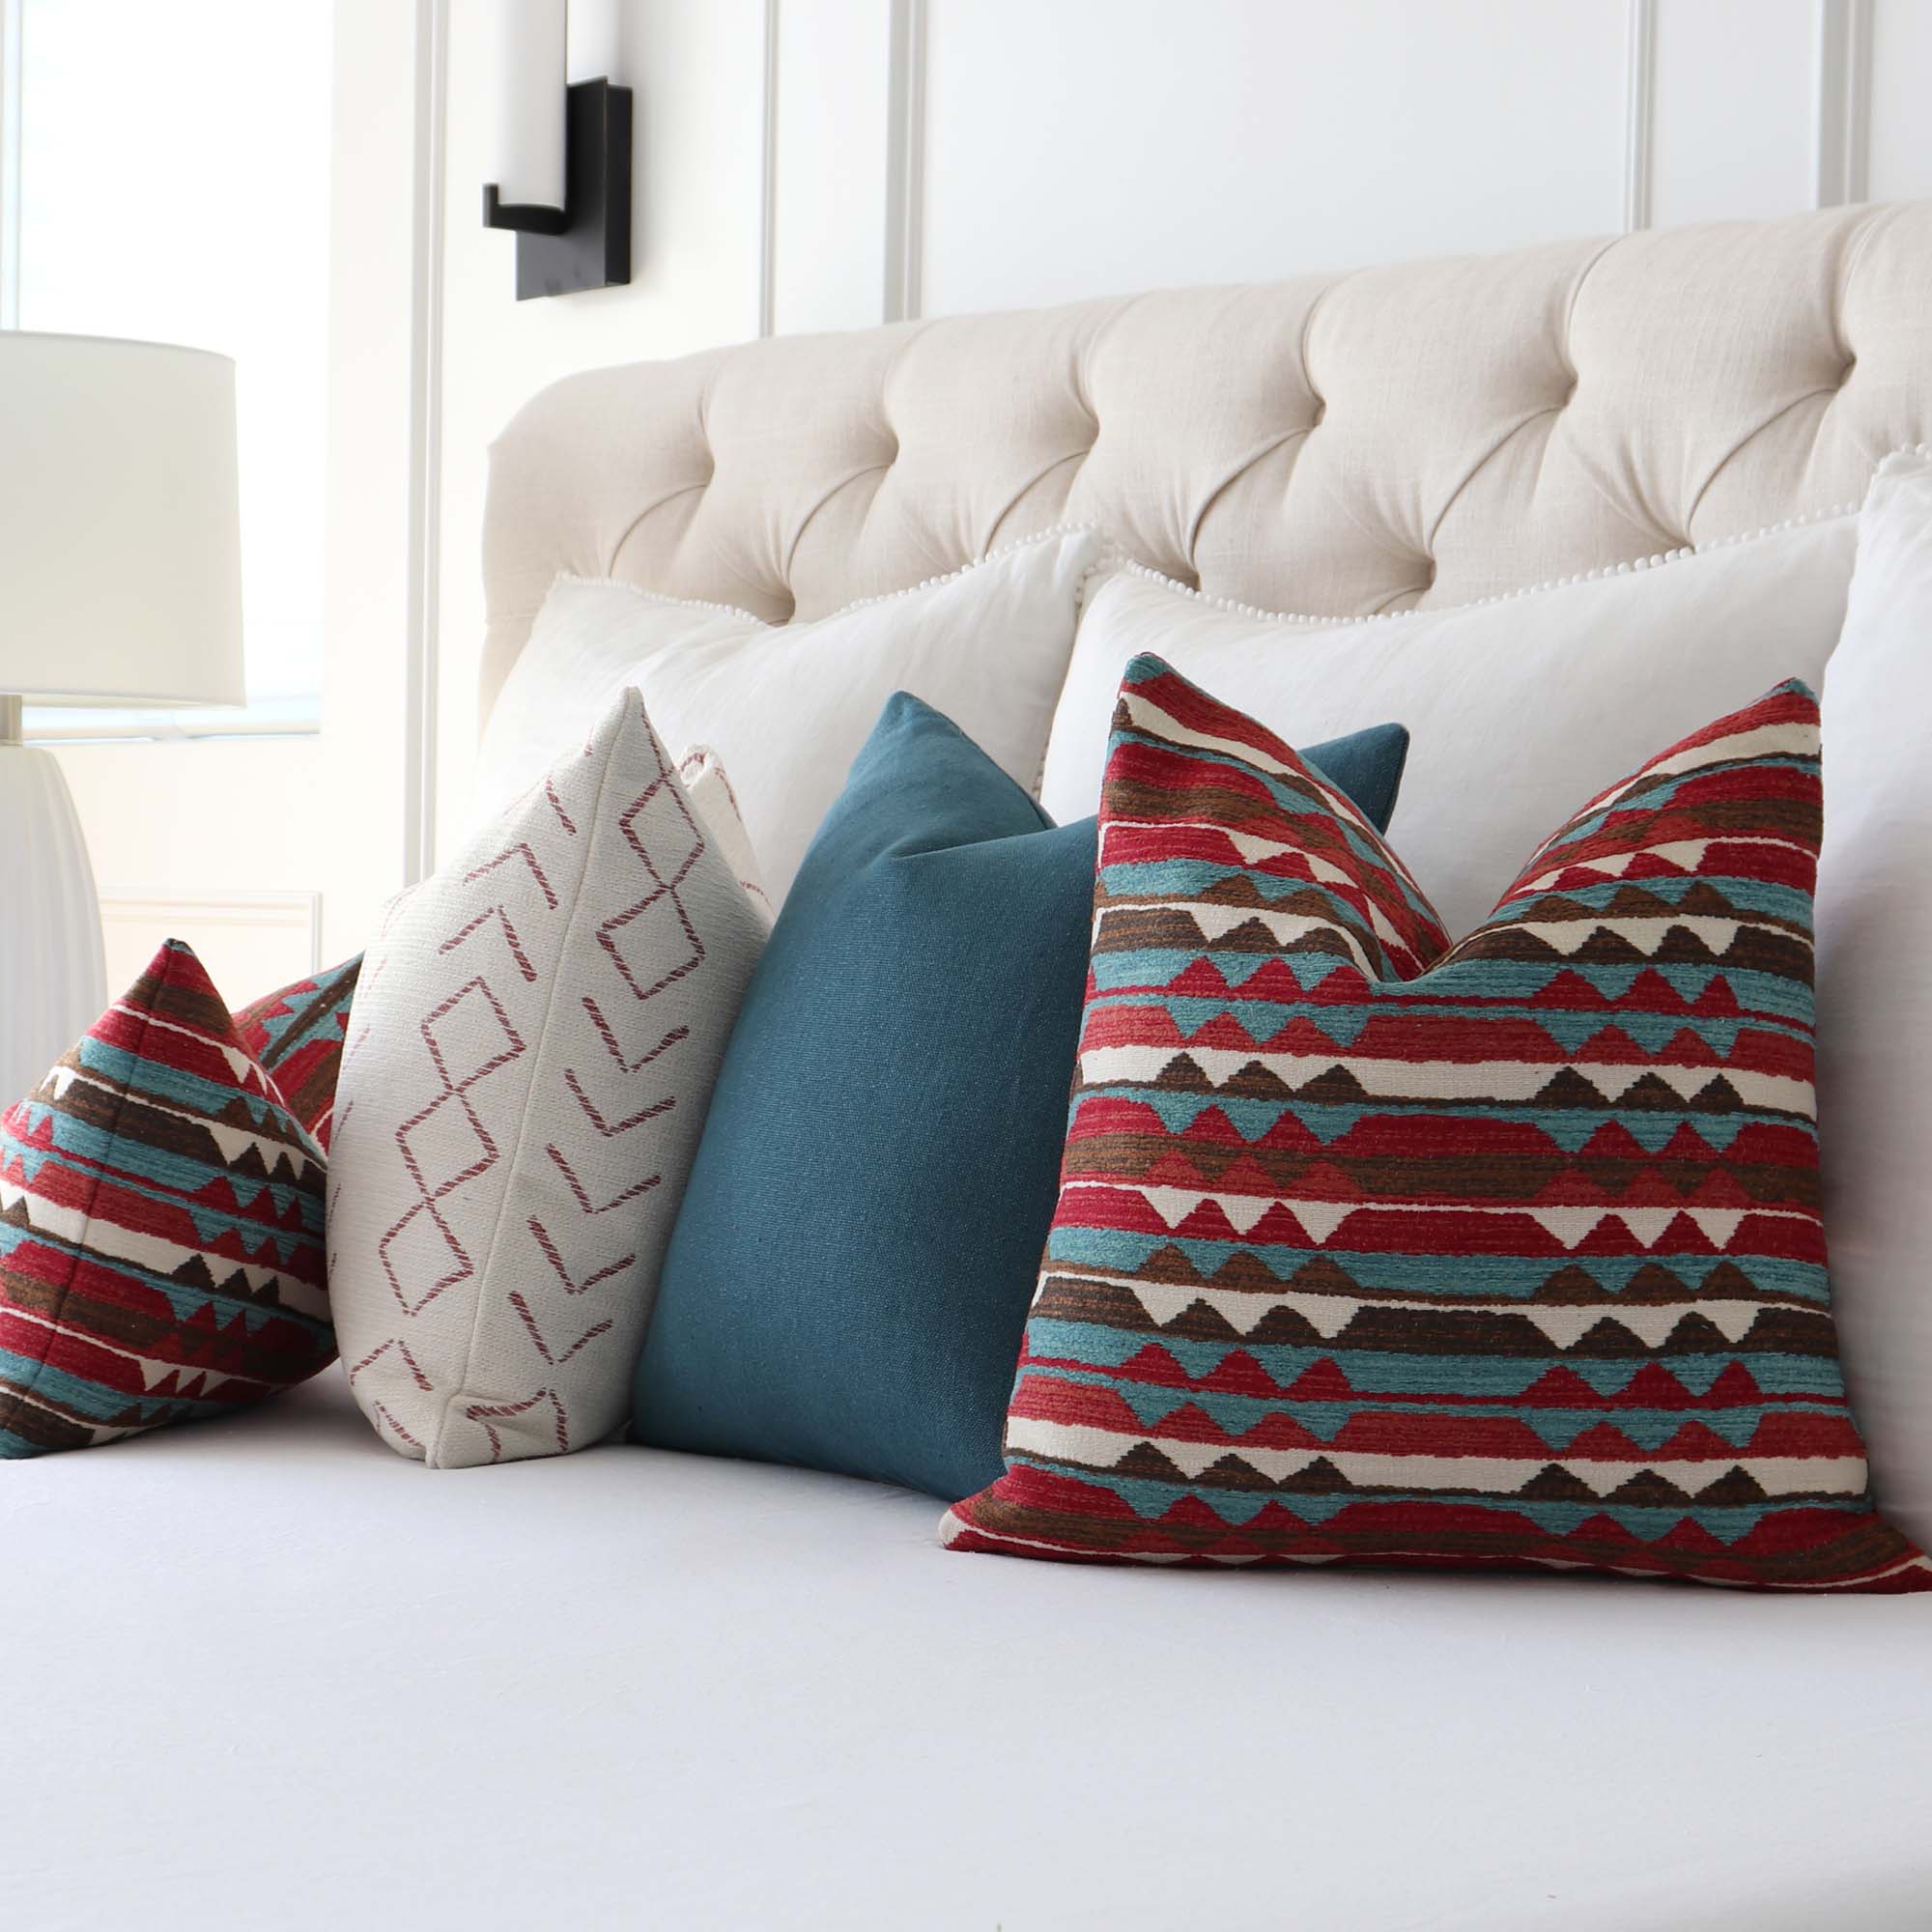 https://www.chloeandolive.com/cdn/shop/files/Thibaut_InsideOut_Performance_Fabric_Saranac_Redwood_Red_Turquoise_Blue_Woven_Ikat_Kilim_Patttern_Designer_Luxury_Throw_Pillow_Cover_with_Matching_Throw_Pillows_in_Bedroom_5000x.jpg?v=1692676037